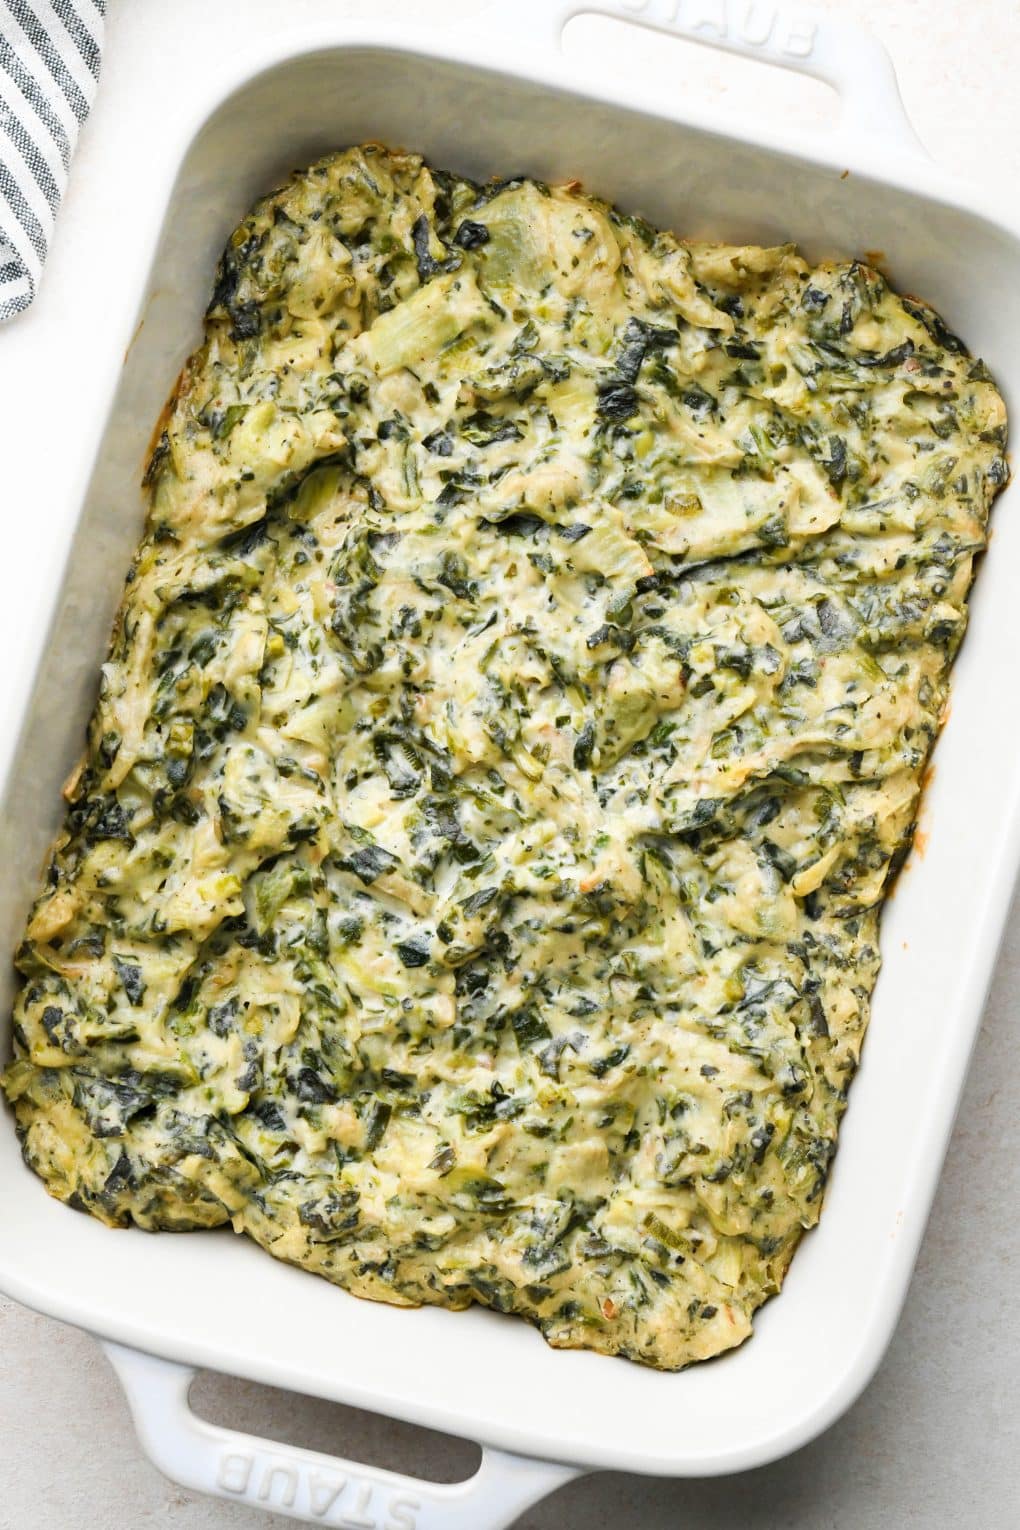 How to make Dairy Free Spinach Artichoke Dip: Dip after baking - slightly darker in color and light brown on the edges.